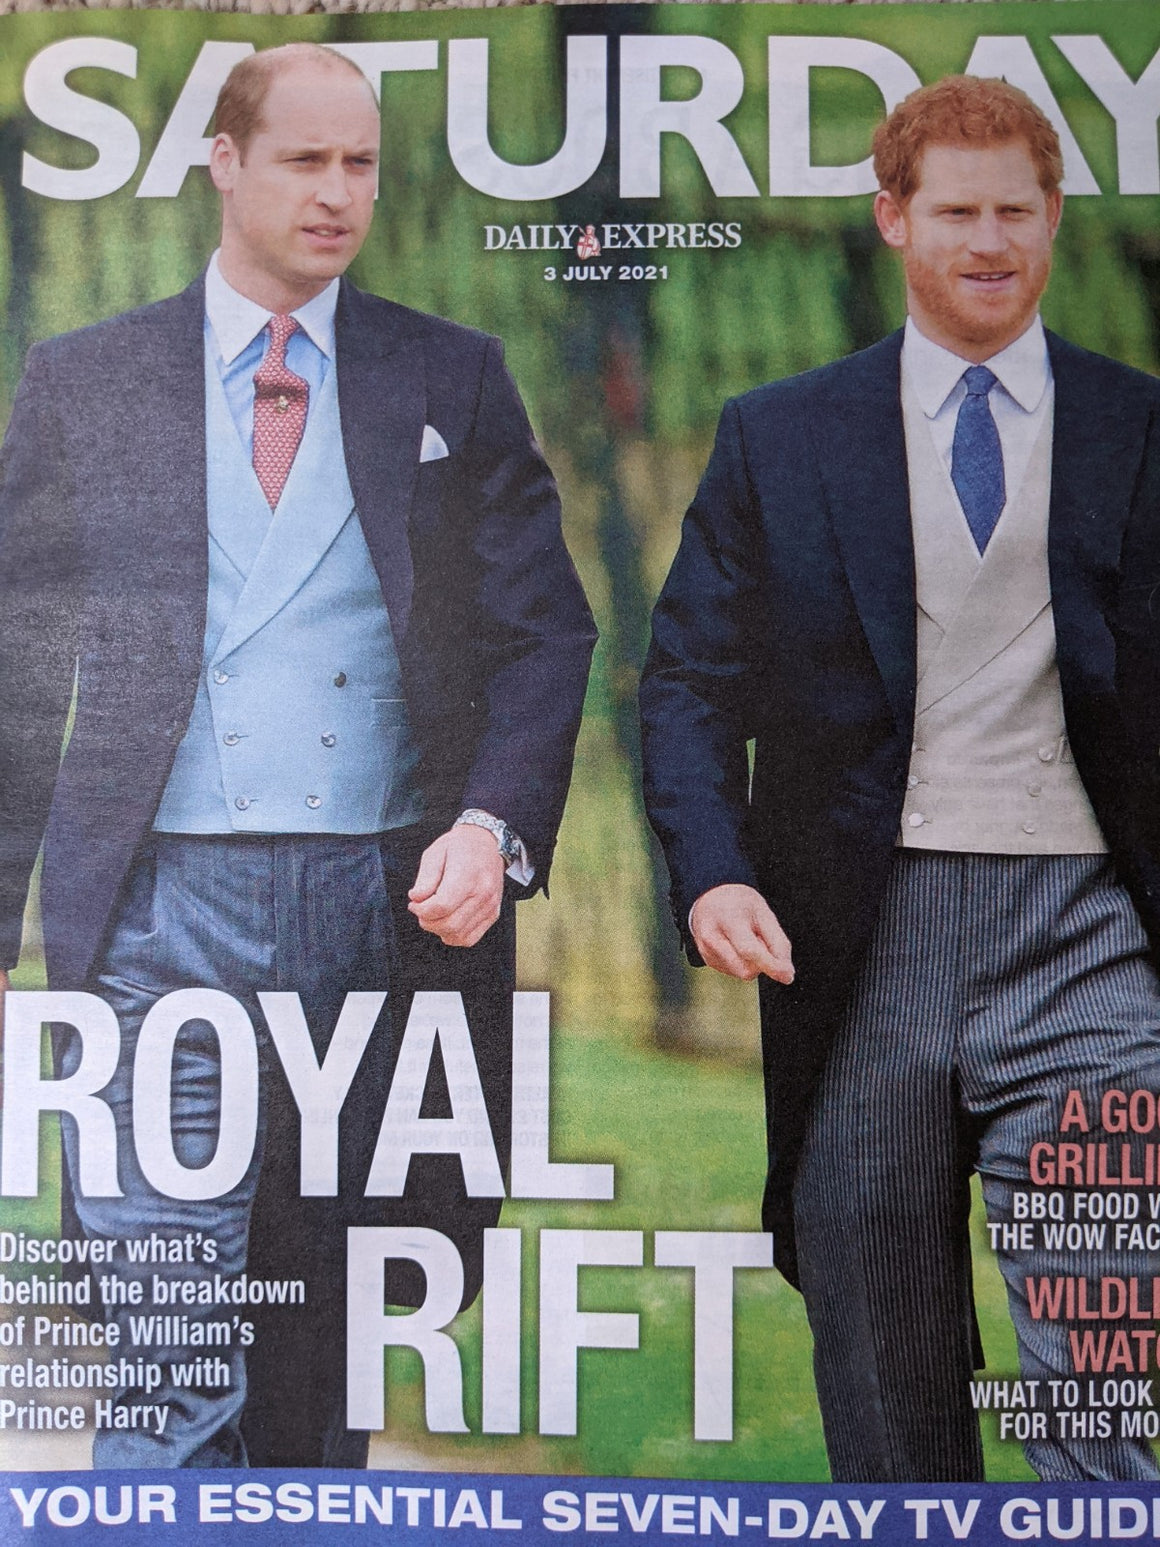 SATURDAY Magazine July 2021: PRINCE WILLIAM & HARRY COVER FEATURE PRINCESS DIANA